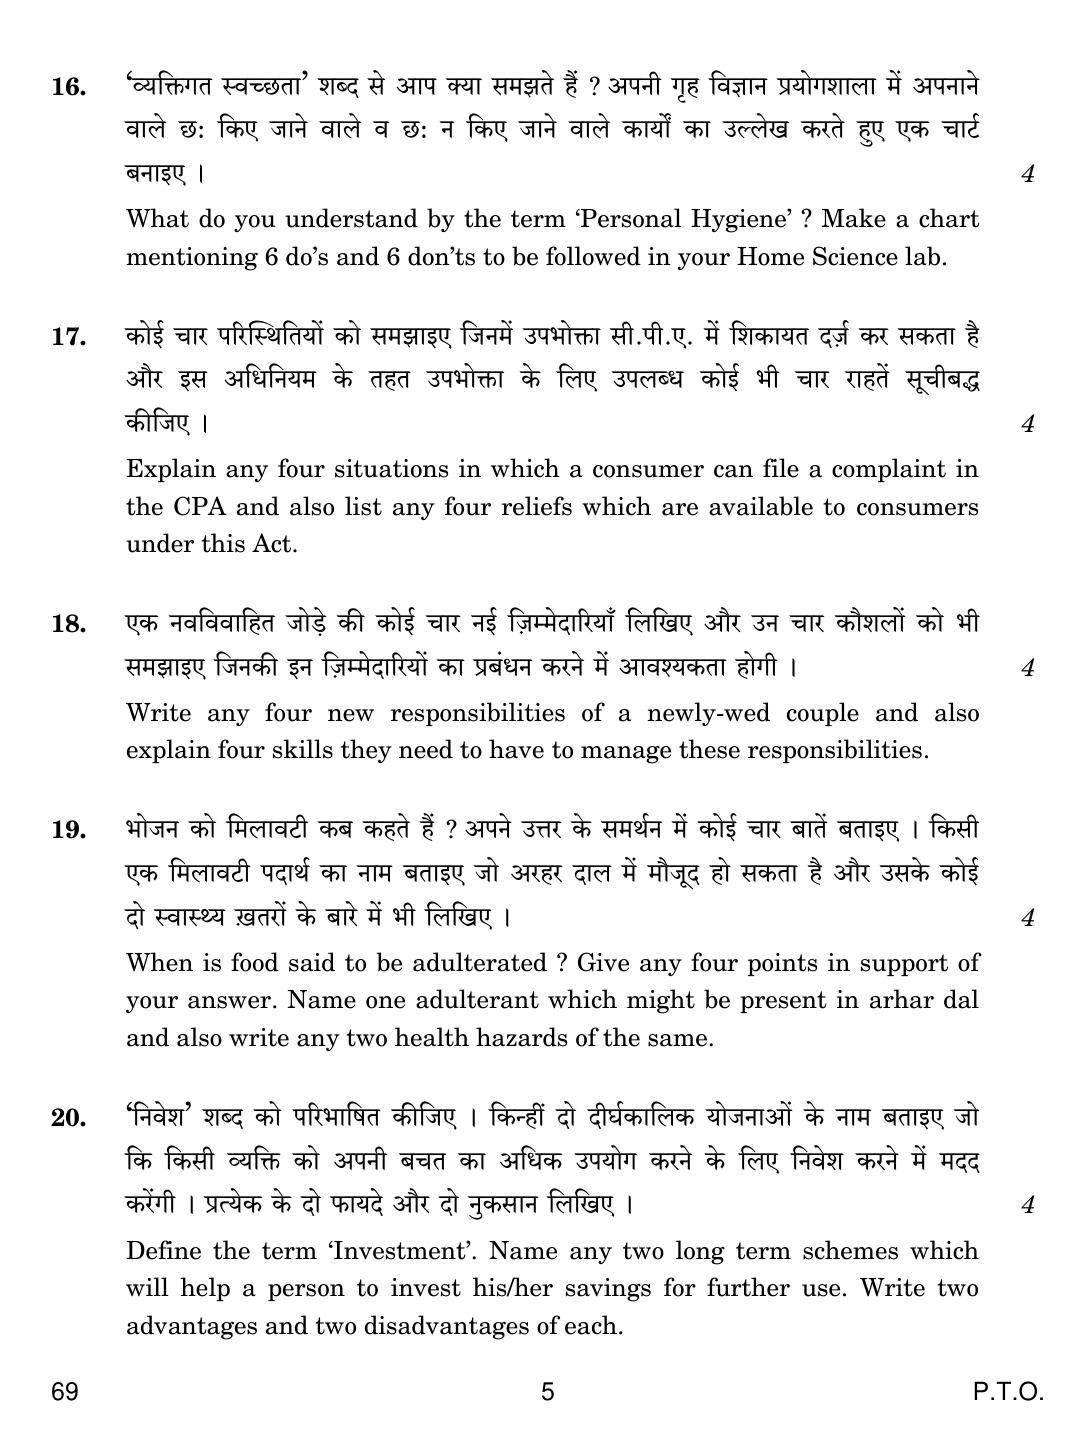 CBSE Class 12 69 HOME SCIENCE 2018 Question Paper - Page 5